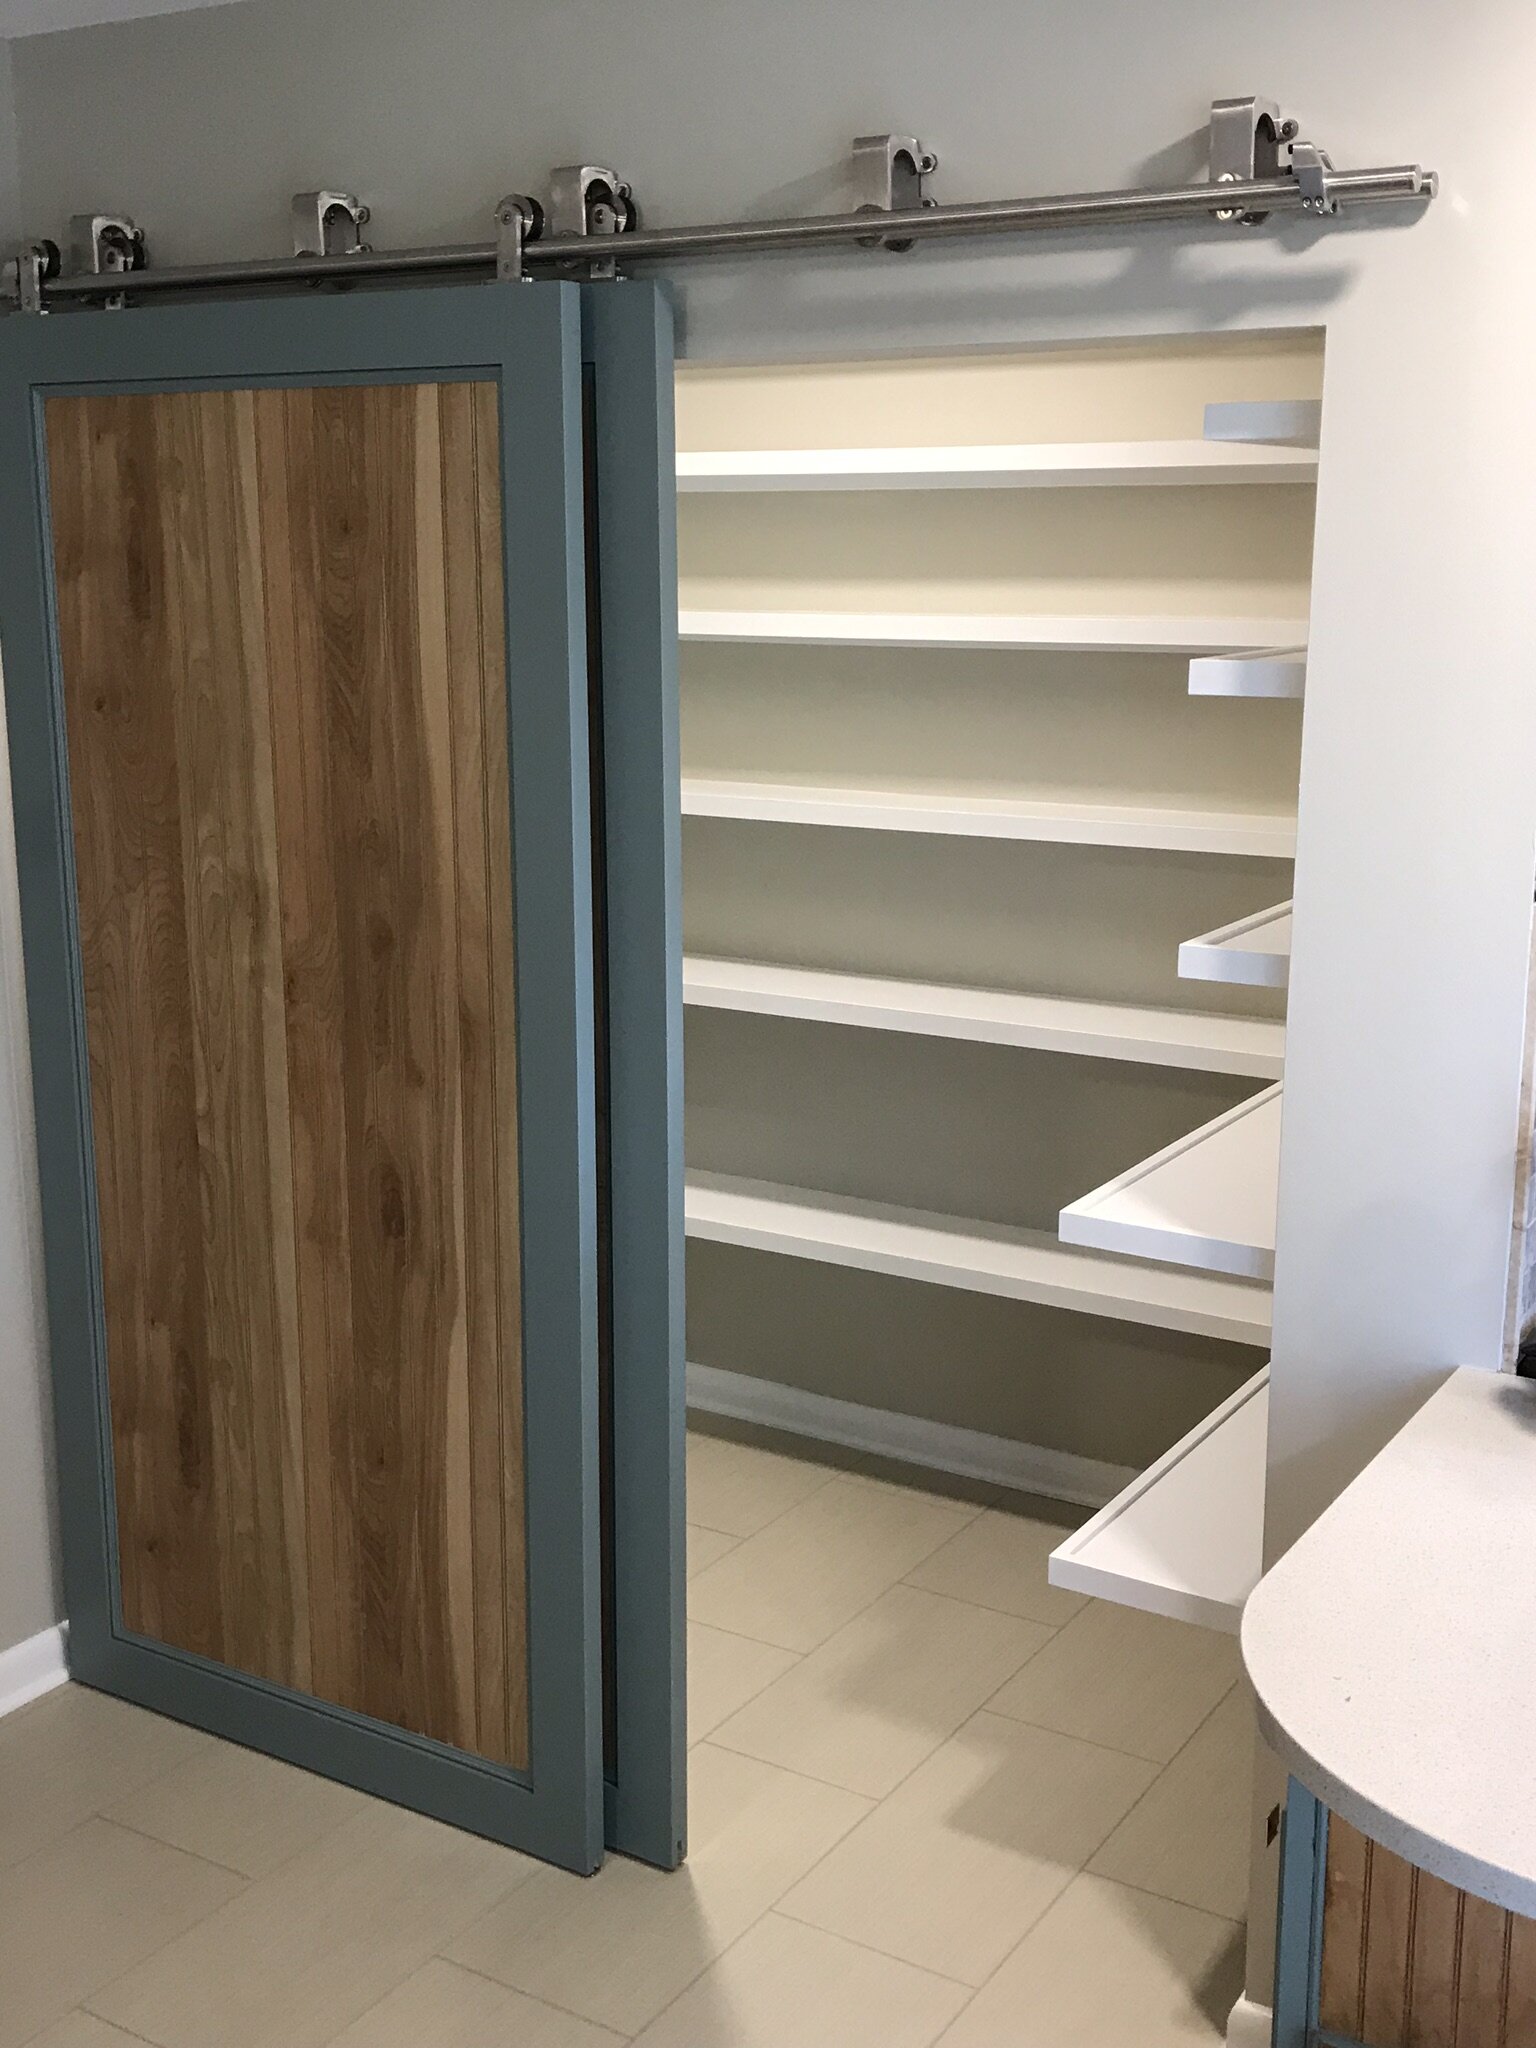 Hanging Door Frame and Pantry Shelves